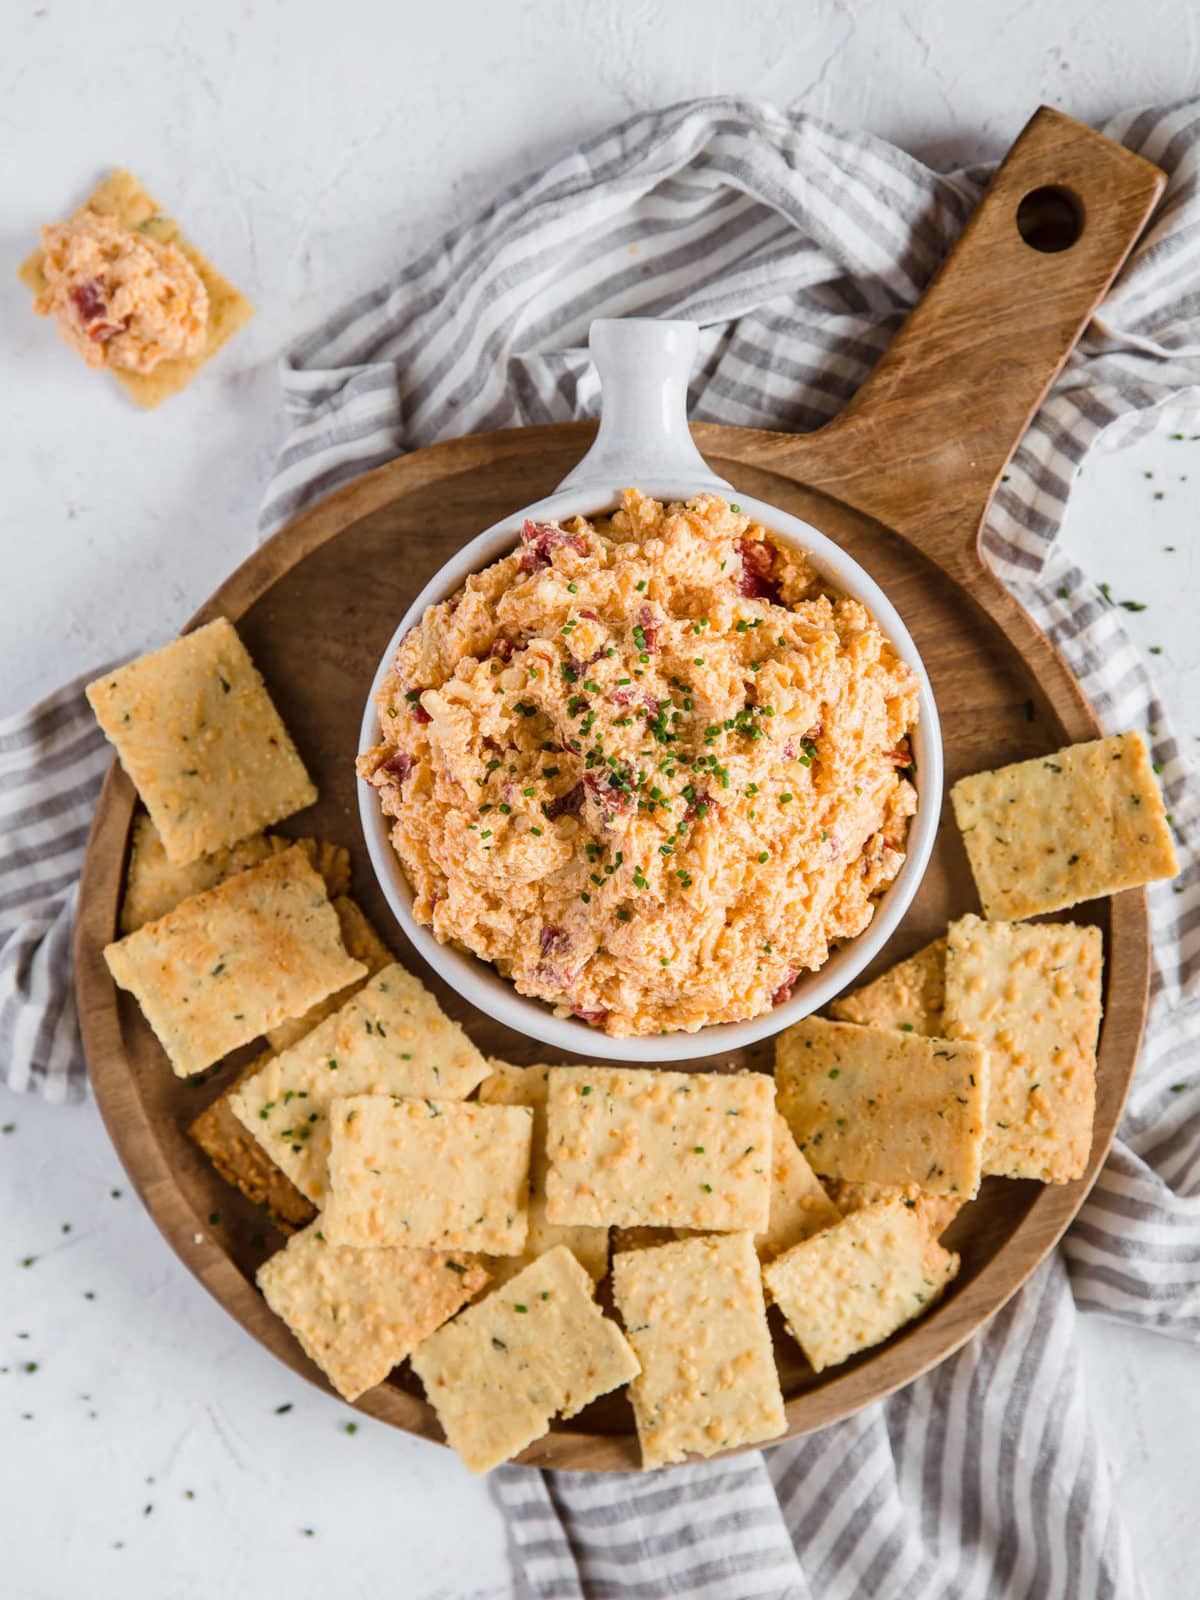 An overhead shot of a cheese dip dish overflowing with Pimento Cheese Dip, sitting on a wooden charcuterie board piled with Parmesan Chive and Garlic Keto Crackers.